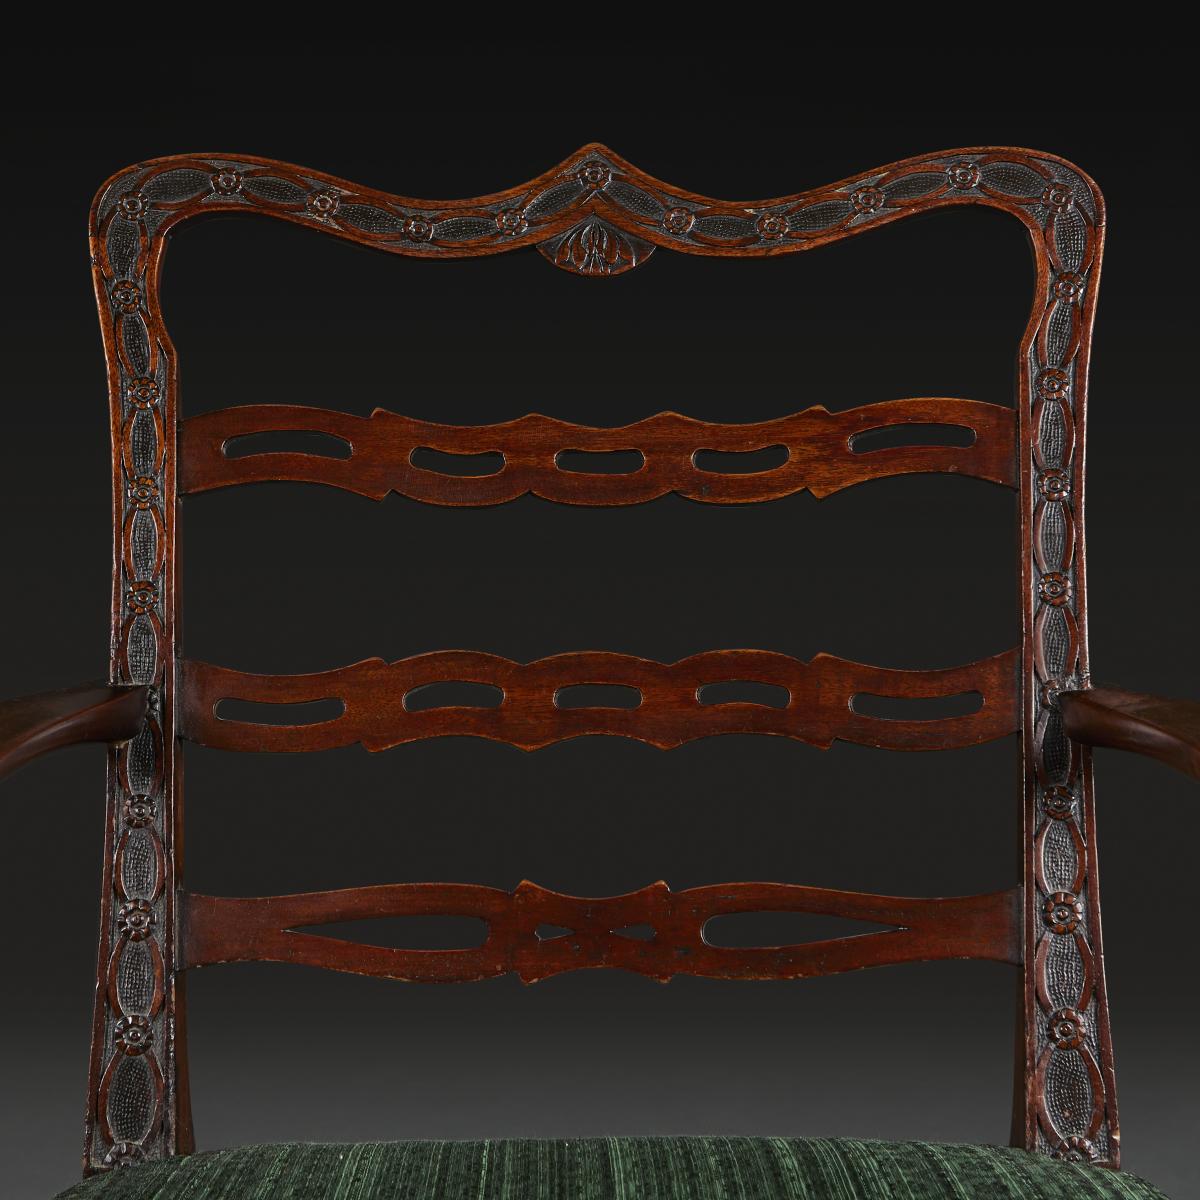 A Fine Pair Of Mid 18th Century Irish Chippendale Chairs